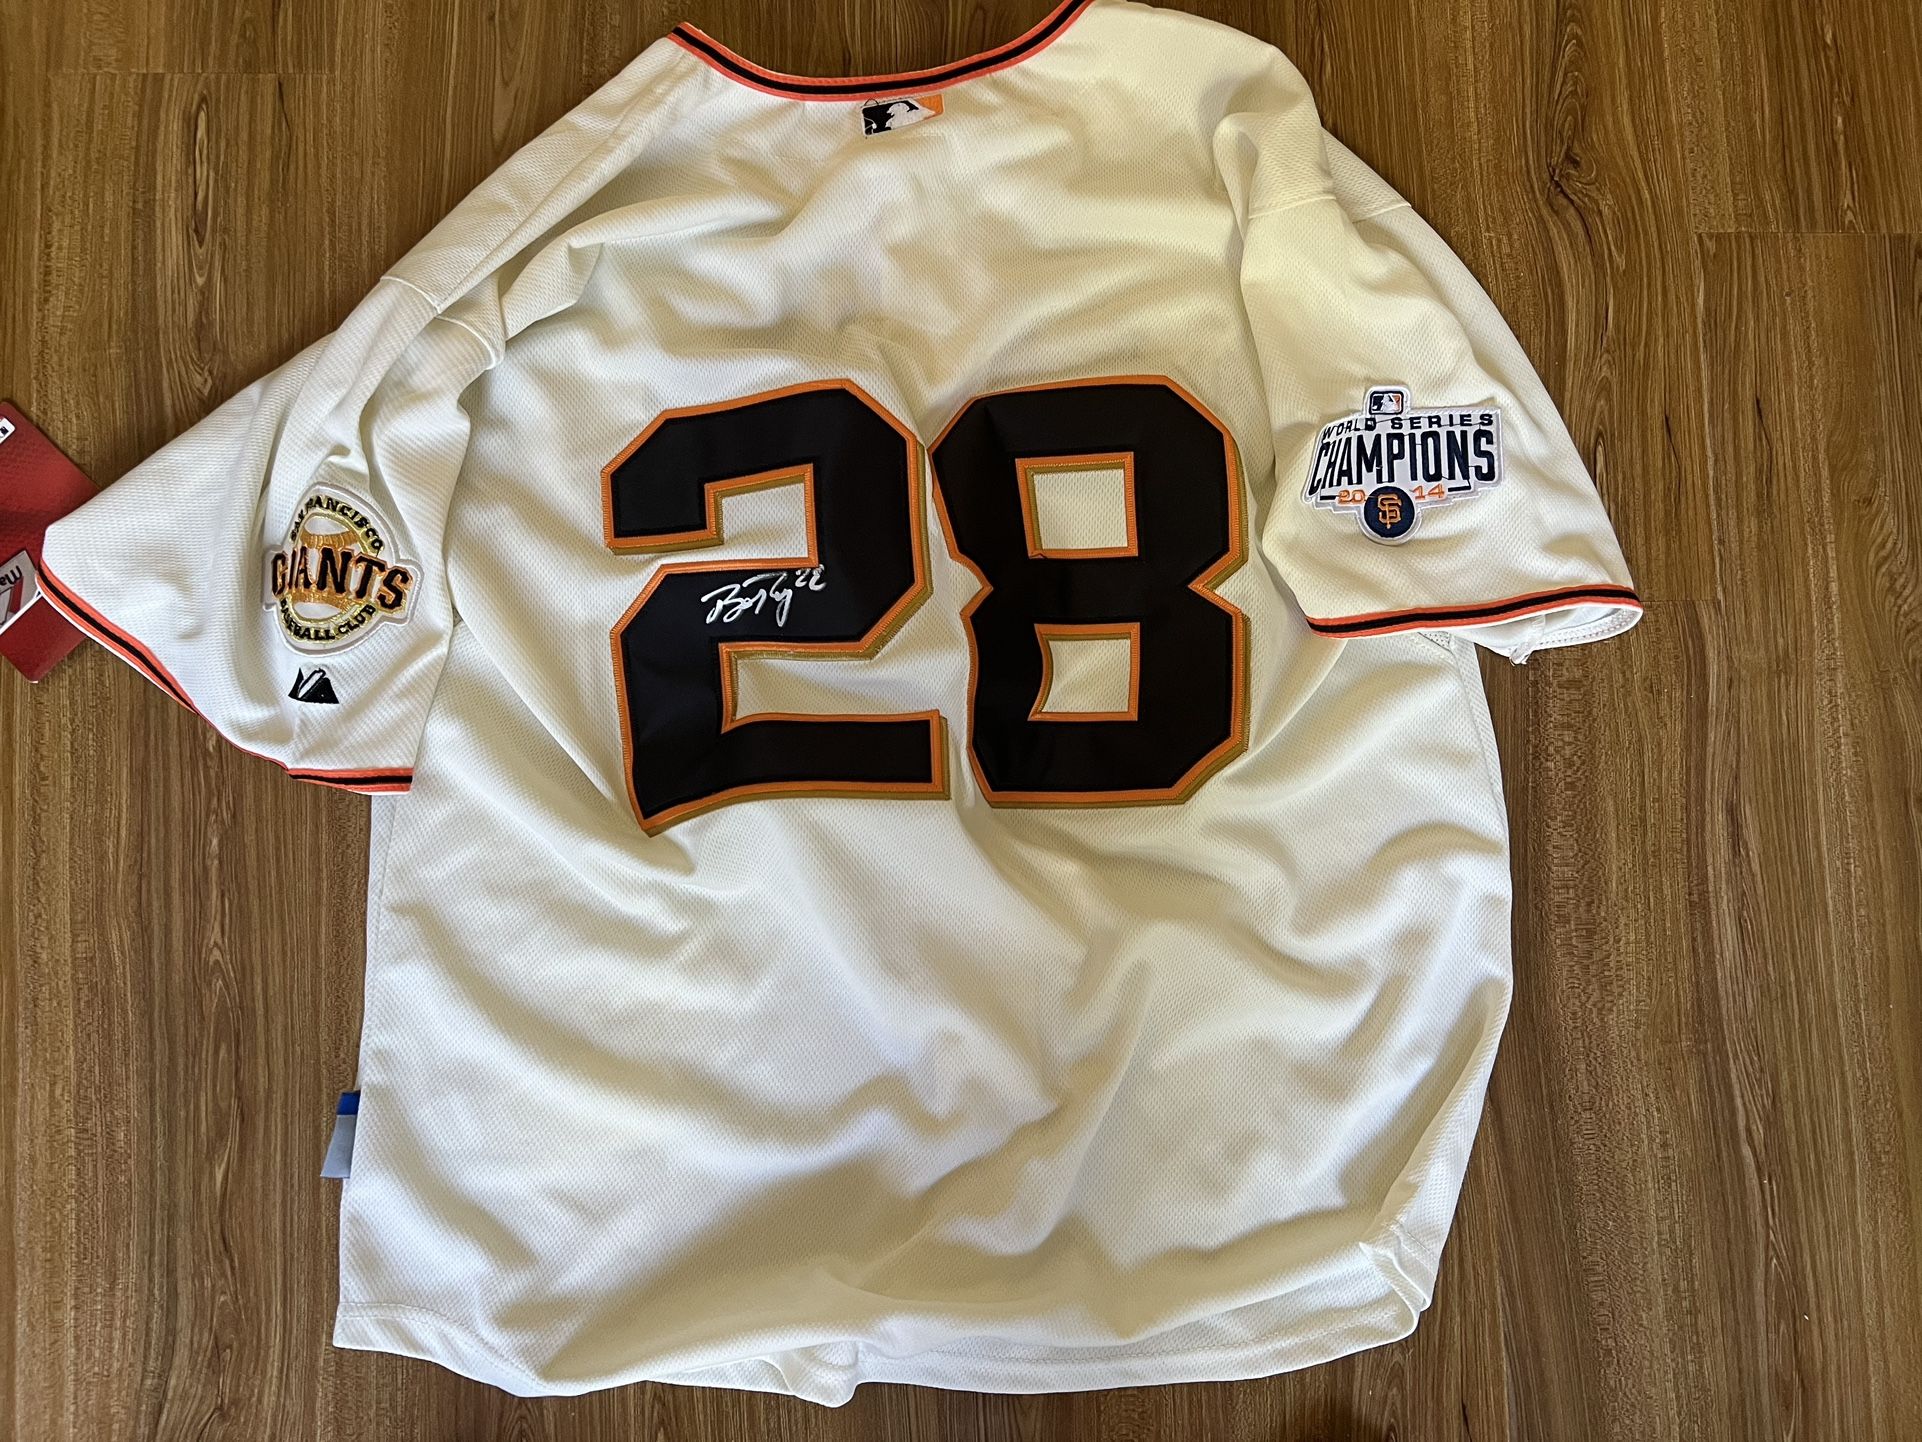 posey autographed jersey